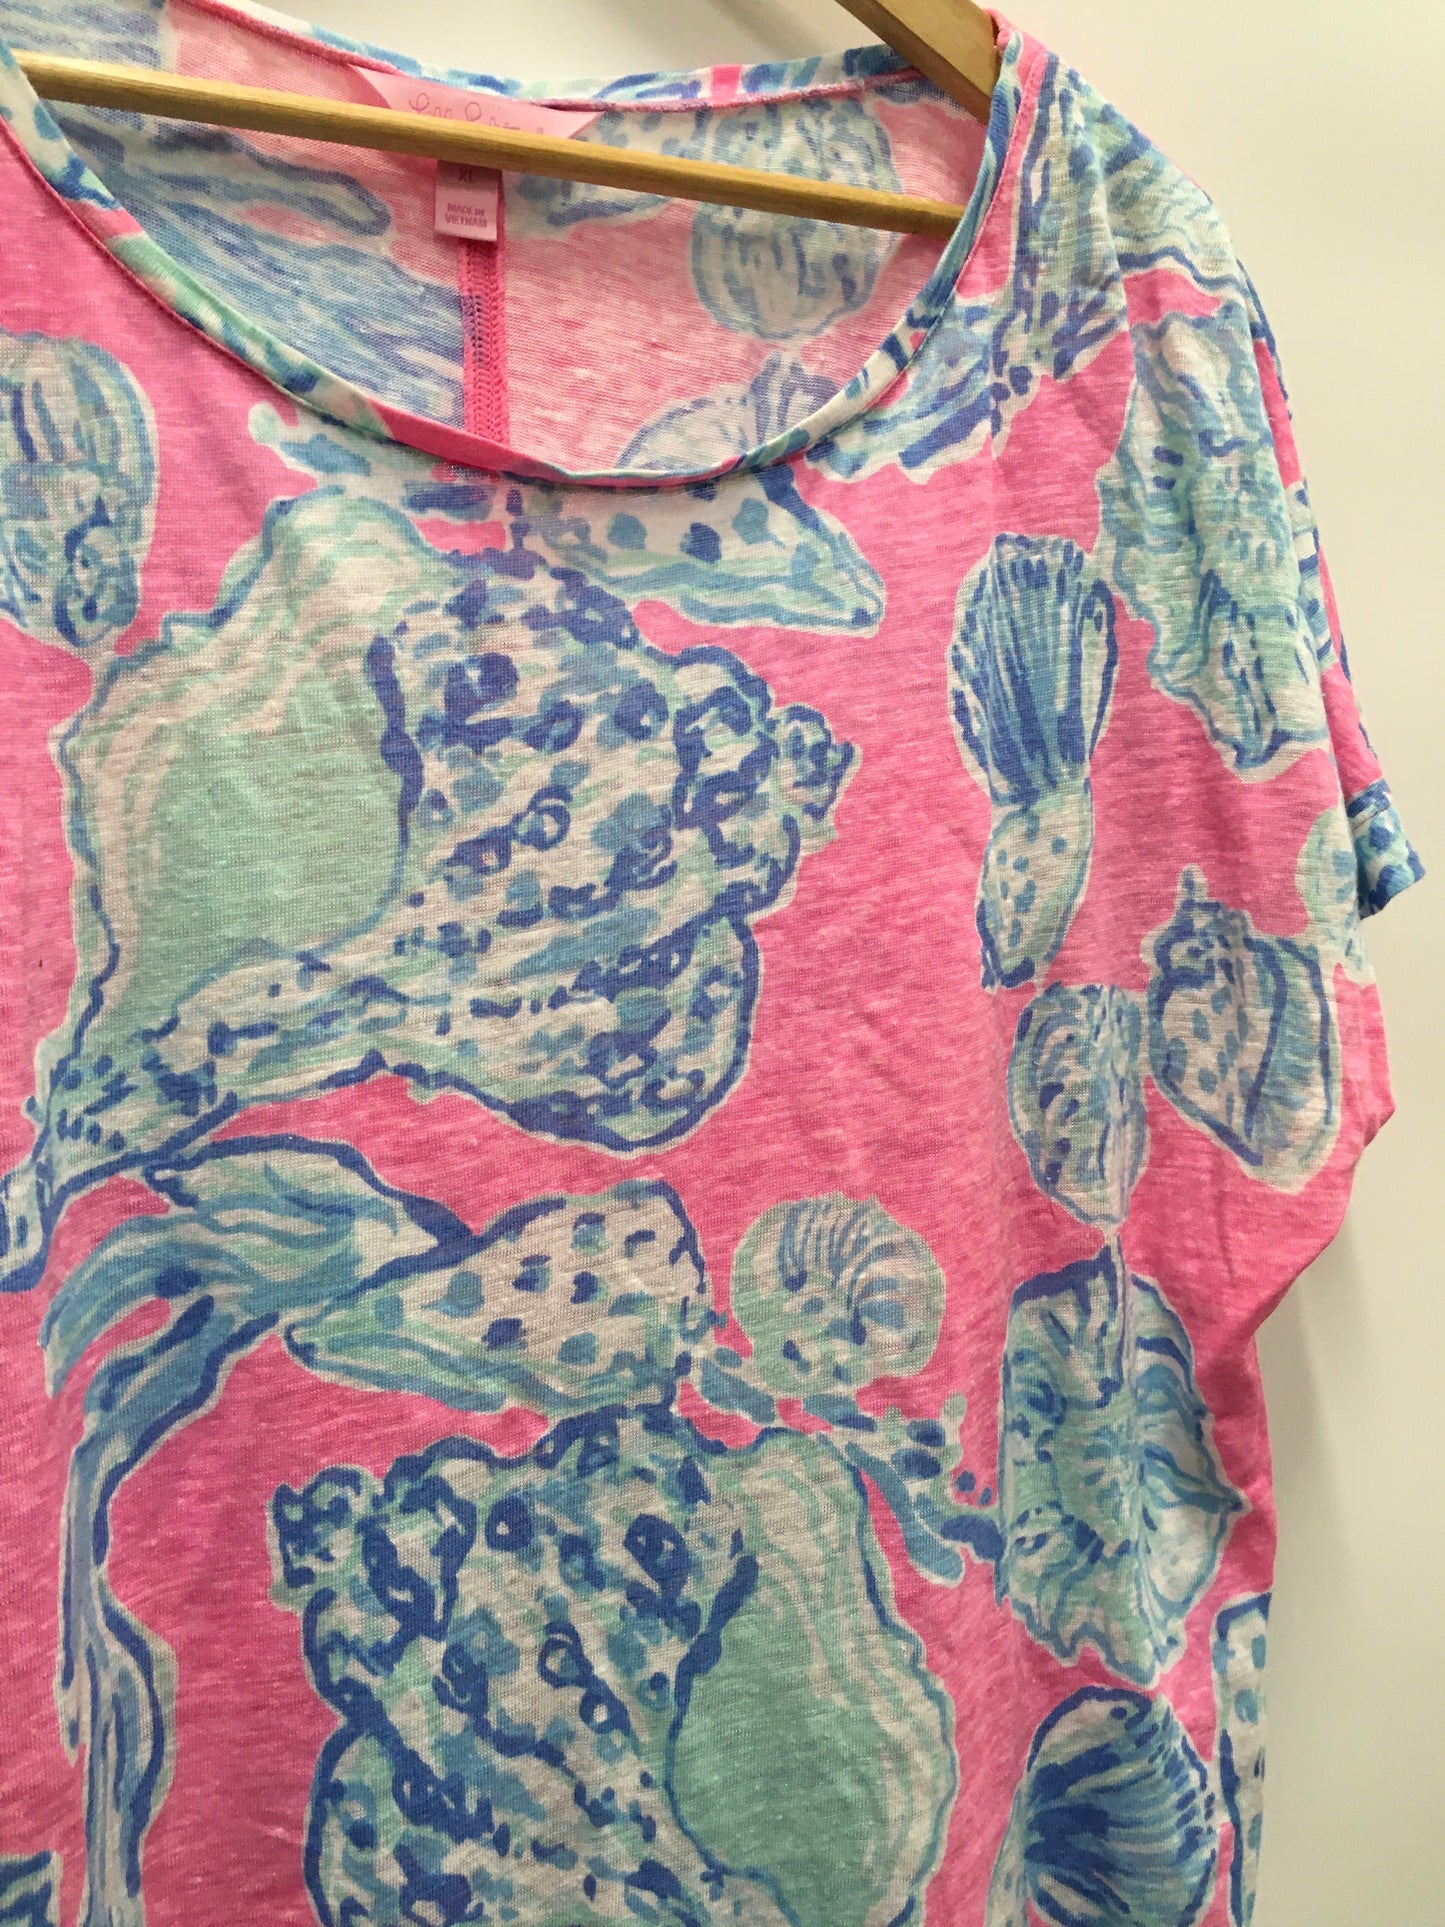 Pink Top Short Sleeve Lilly Pulitzer, Size Xl